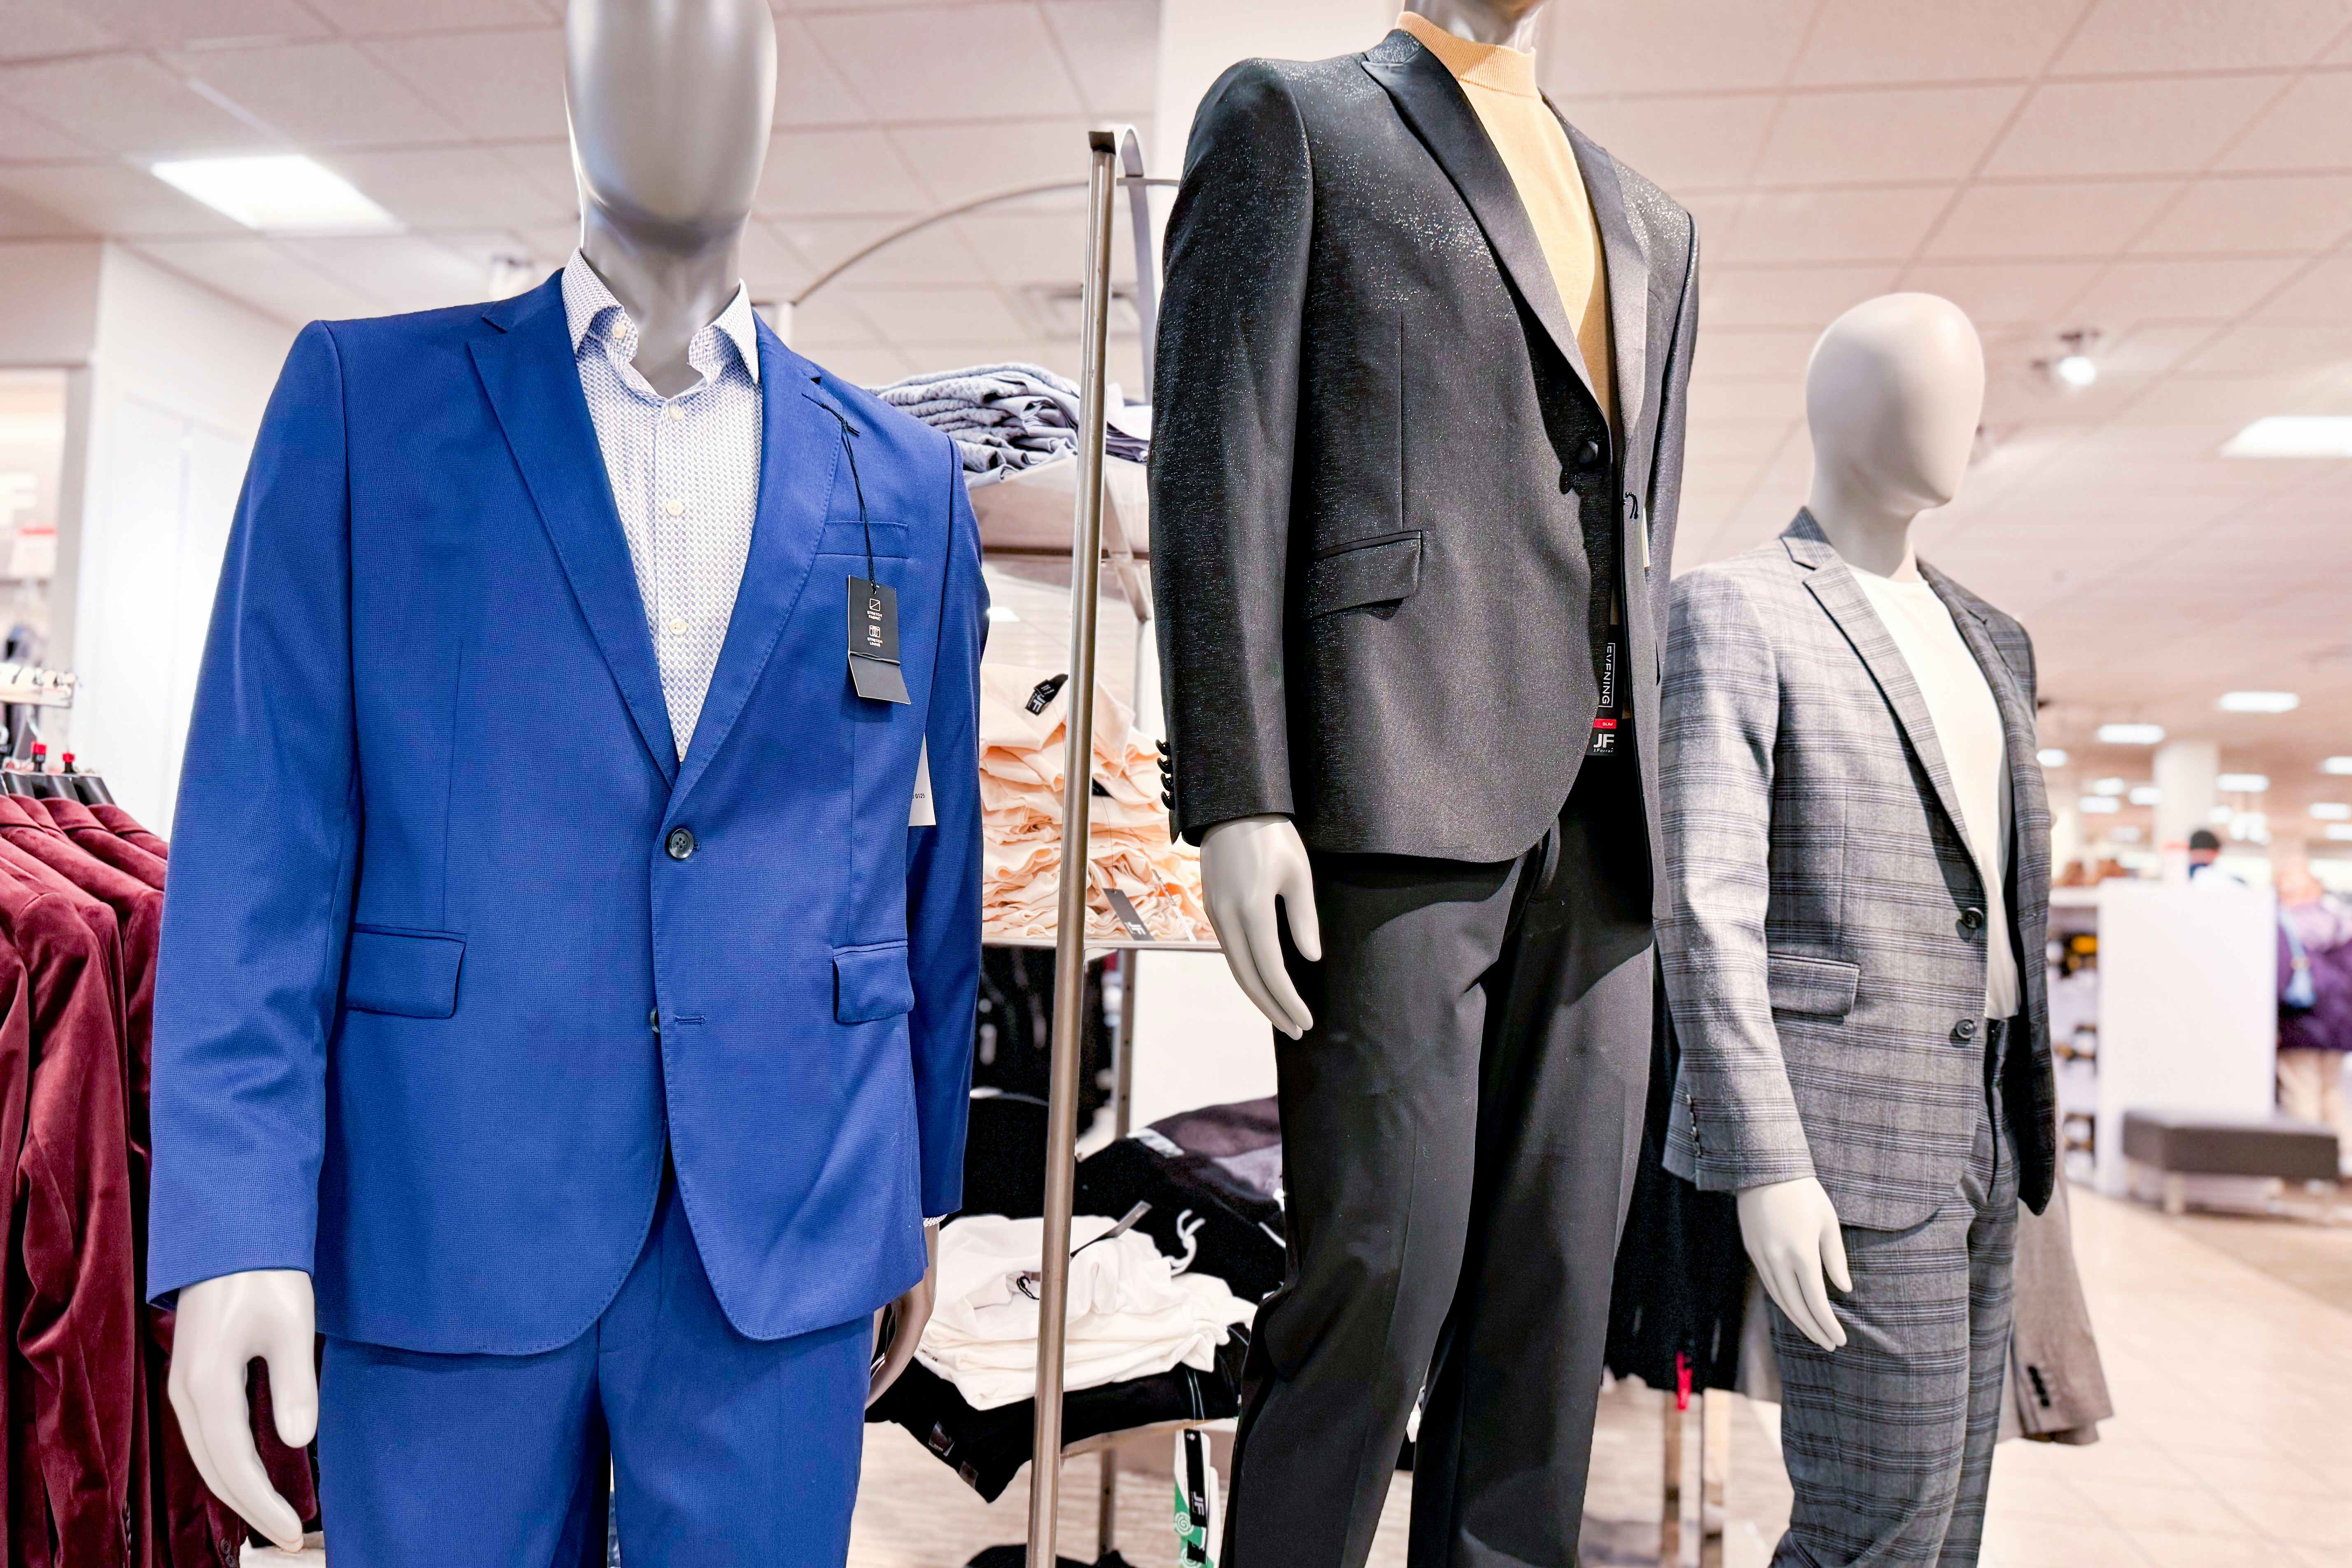 Men's Name-Brand 2-Piece Suits, as Low as $80 at Macy's